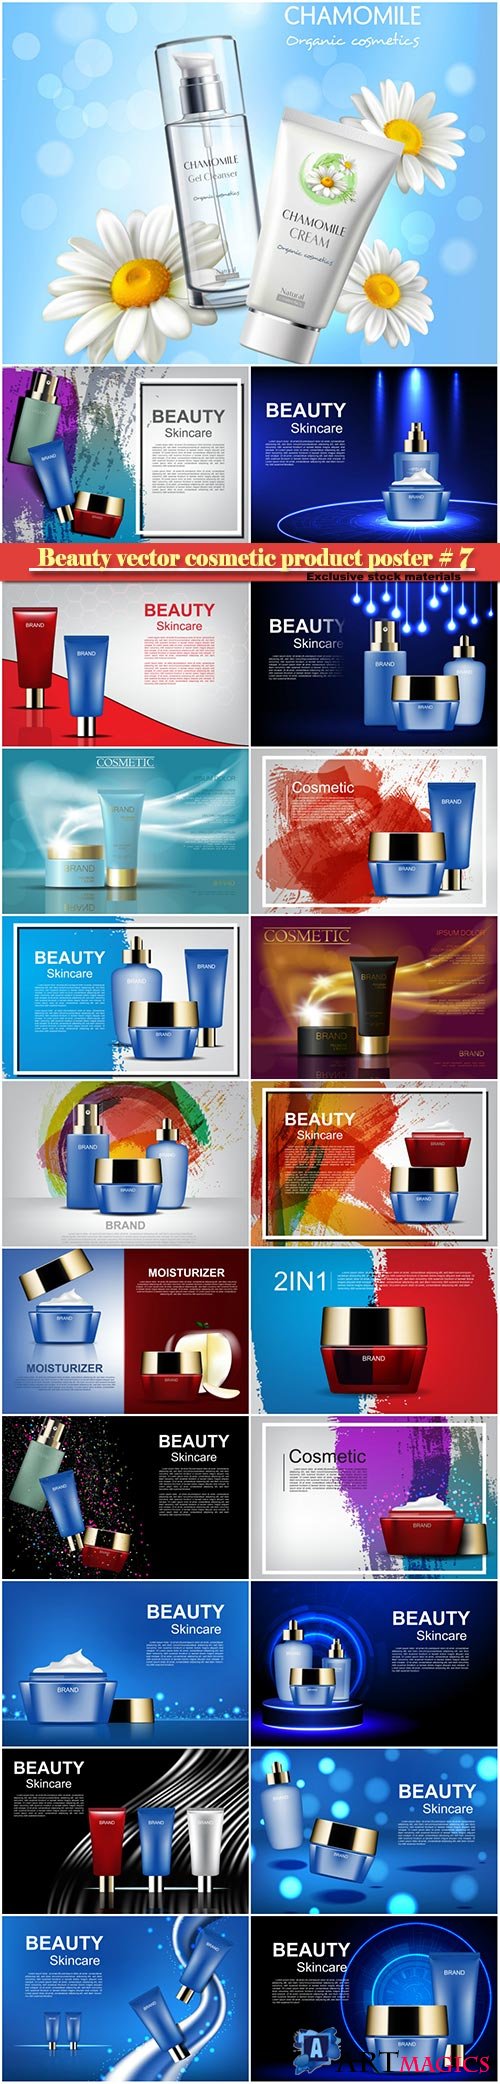 Beauty vector cosmetic product poster # 7